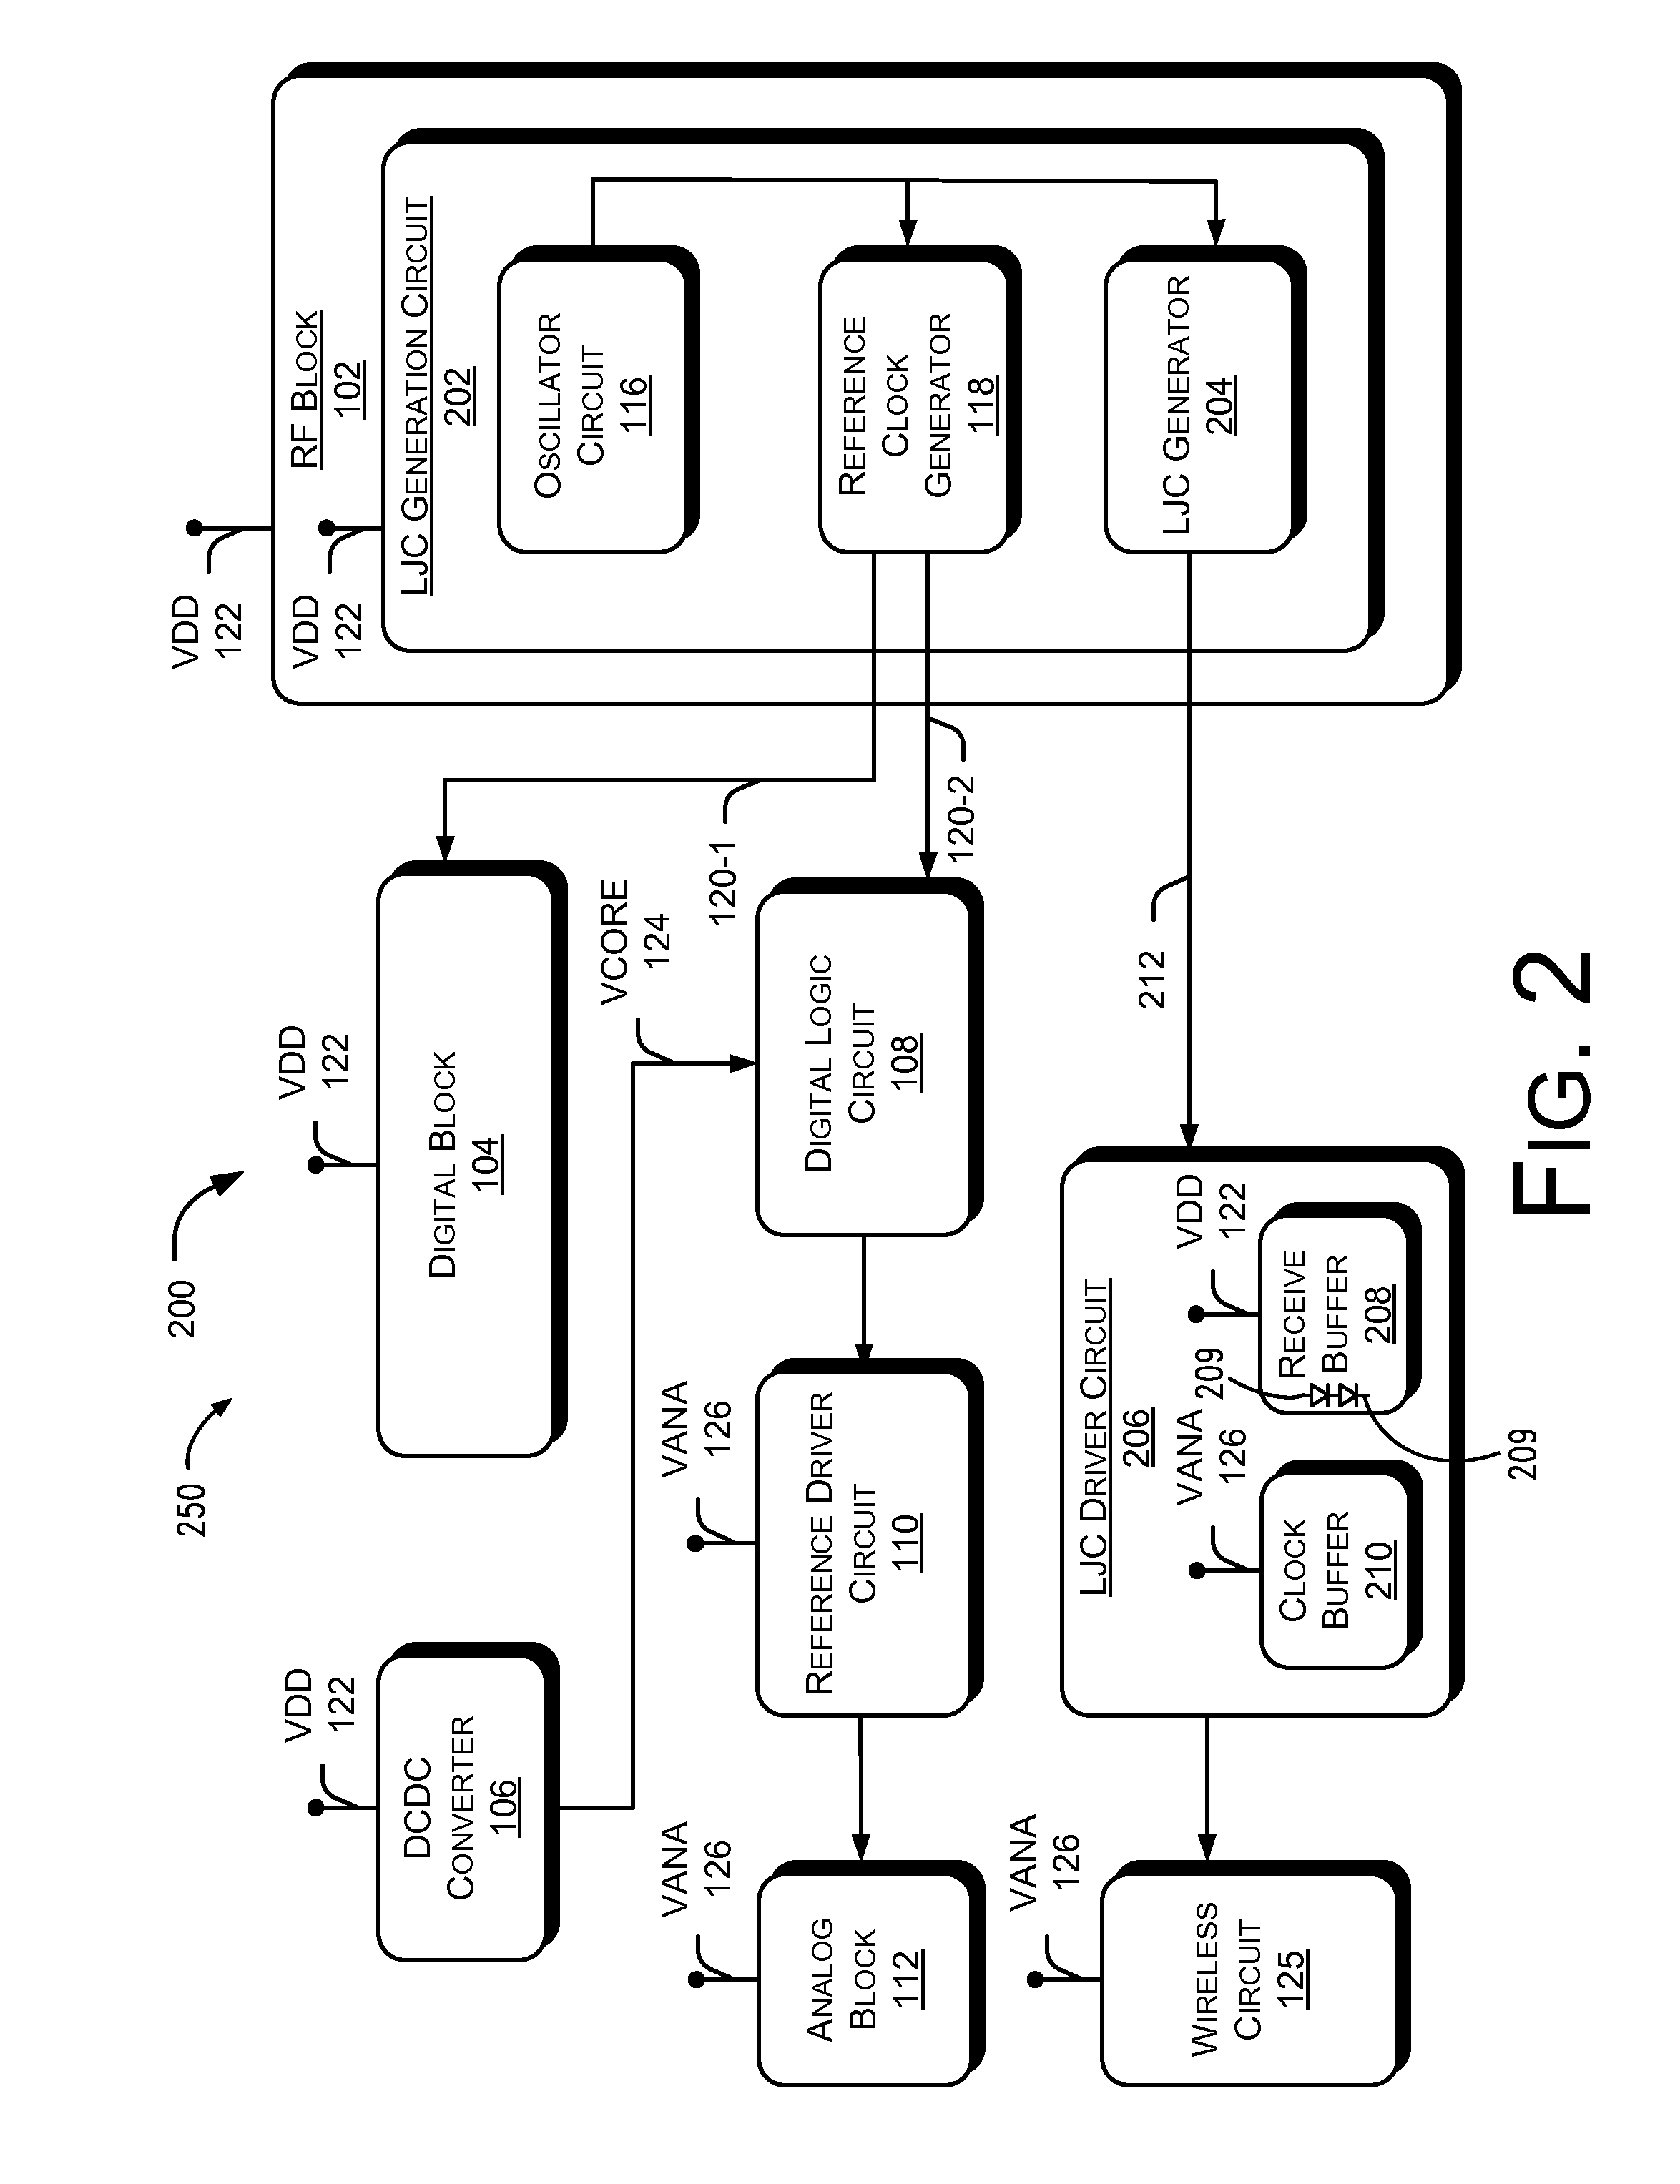 Generation of a low jitter clock signal